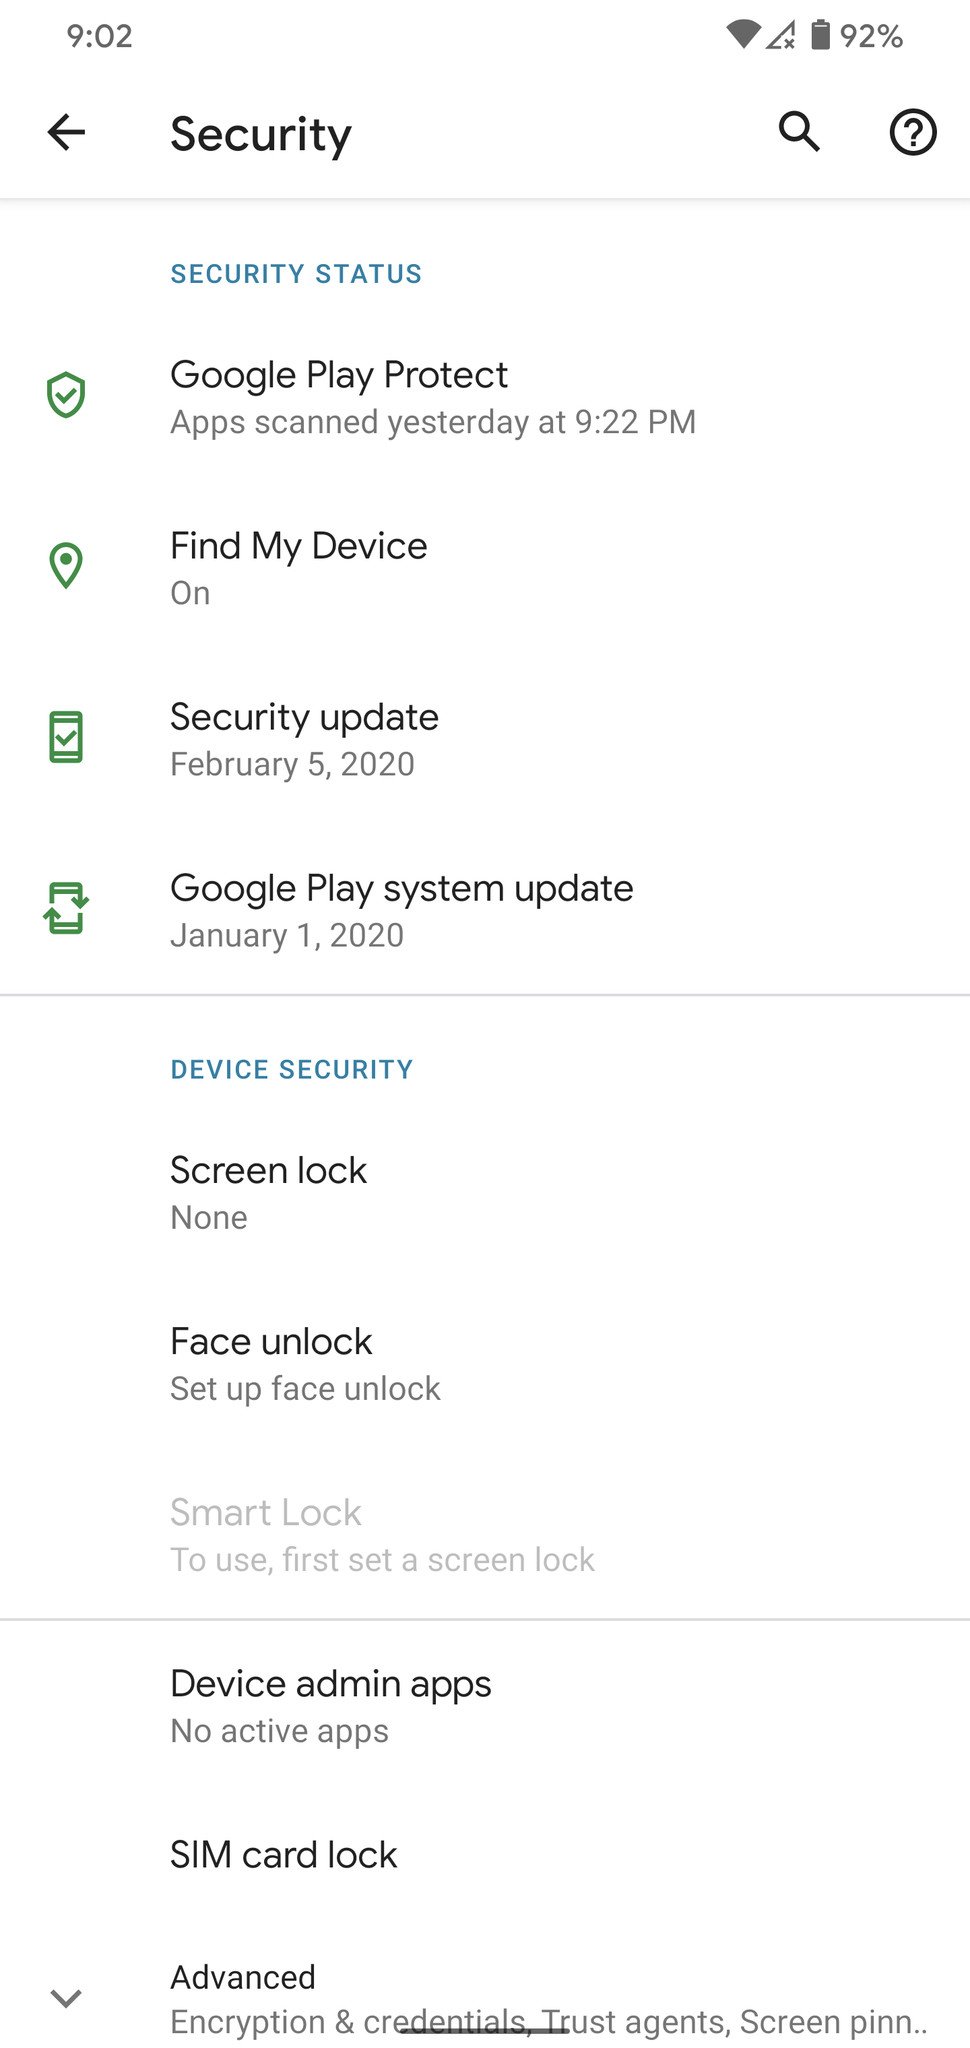 How to disable the lock screen on Android